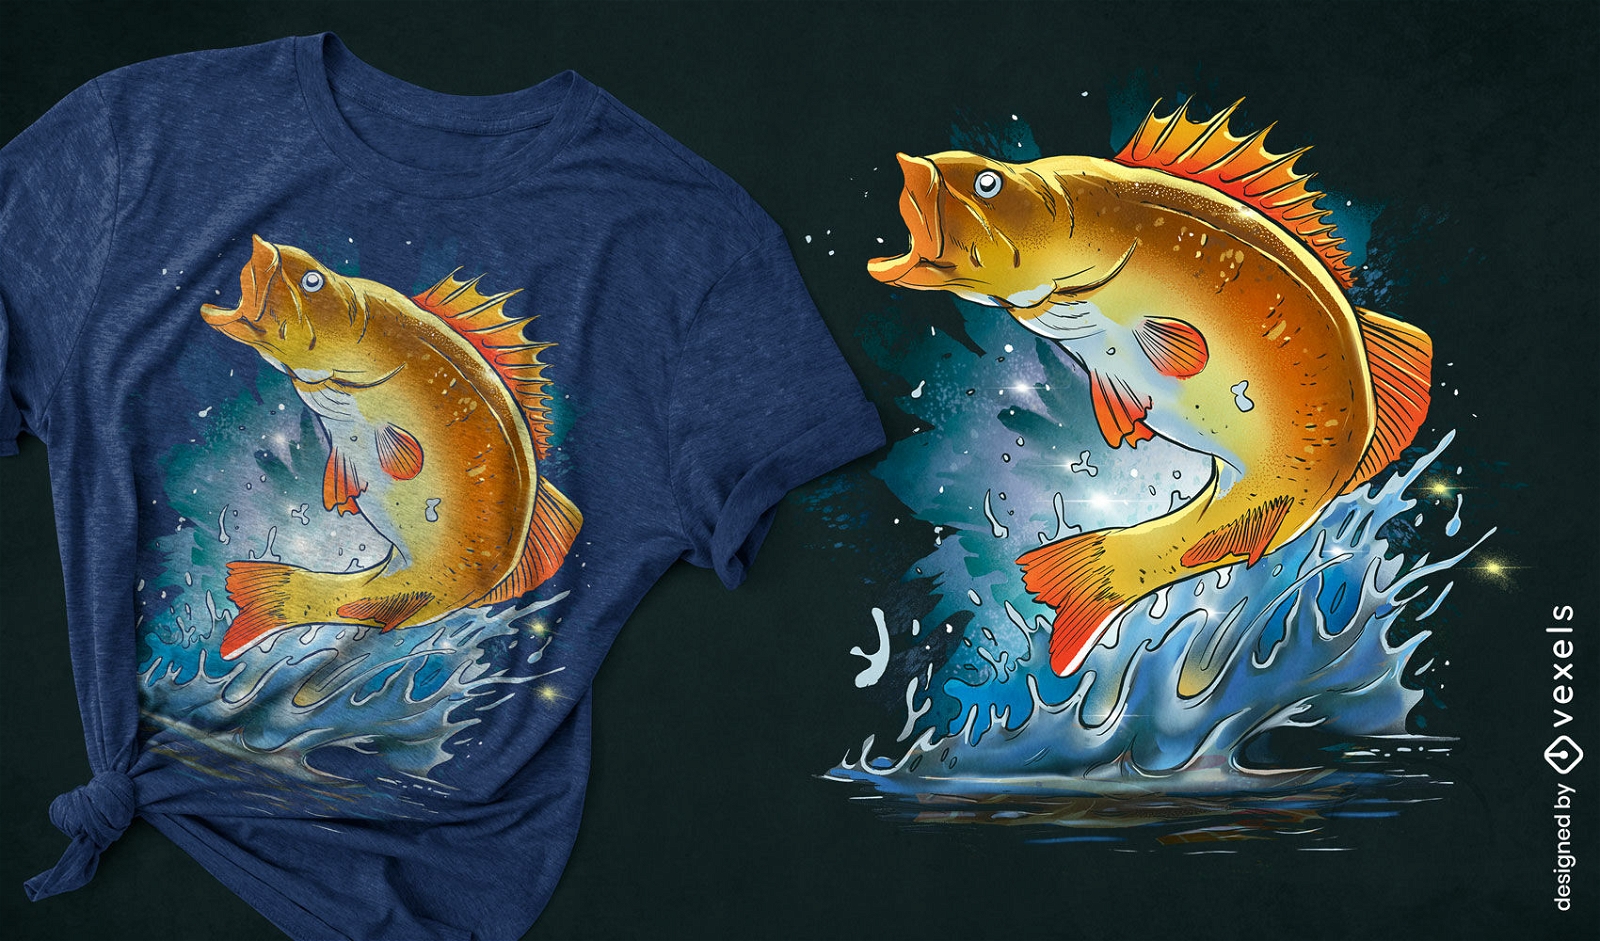 https://images.vexels.com/media/users/3/295919/raw/e40e28fc9f38413d3163b225c028ce18-golden-fish-jumping-from-water-t-shirt-design.jpg